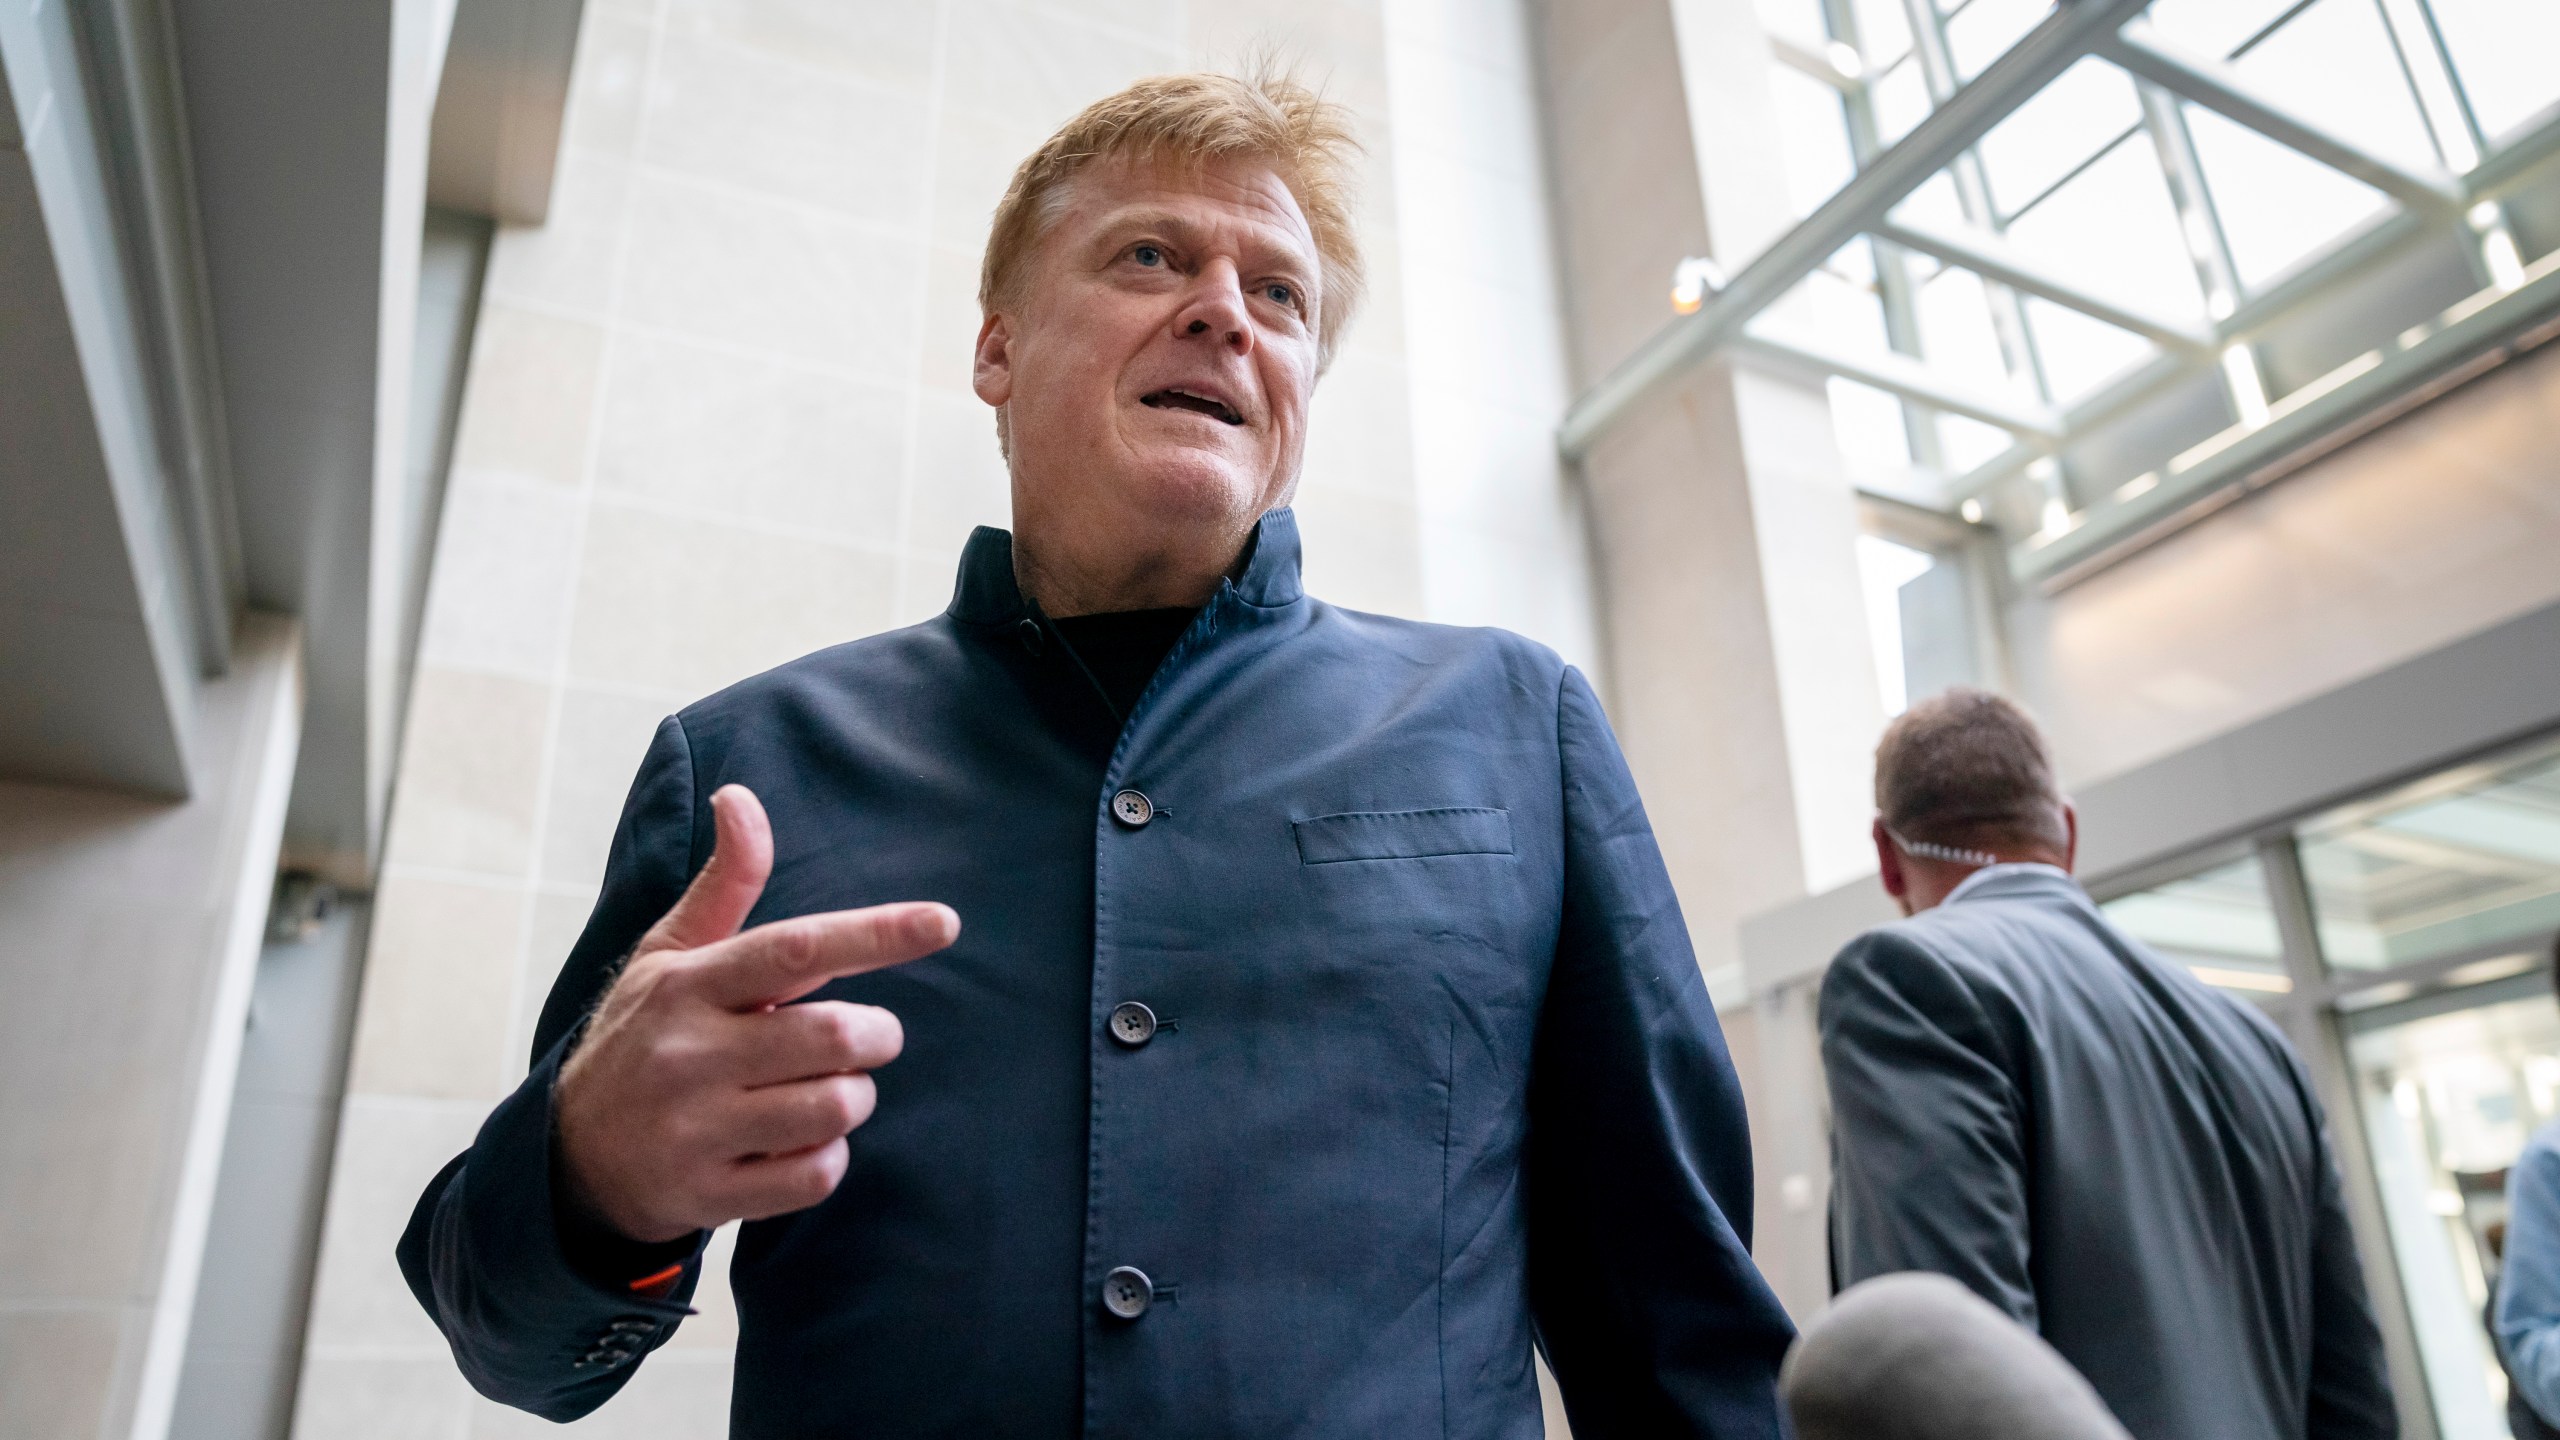 FILE - Patrick Byrne, the former chief executive of Overstock.com arrives at the O'Neill House Office Building on Capitol Hill in Washington, July 15, 2022. An attorney charged with illegally accessing Michigan voting machines after the 2020 election acknowledged in a court filing Monday, March 18, 2024, that she disseminated numerous confidential emails from a voting machine company in a separate case. Lambert had just joined the Dominion defamation case to represent Byrne. (AP Photo/J. Scott Applewhite, File)